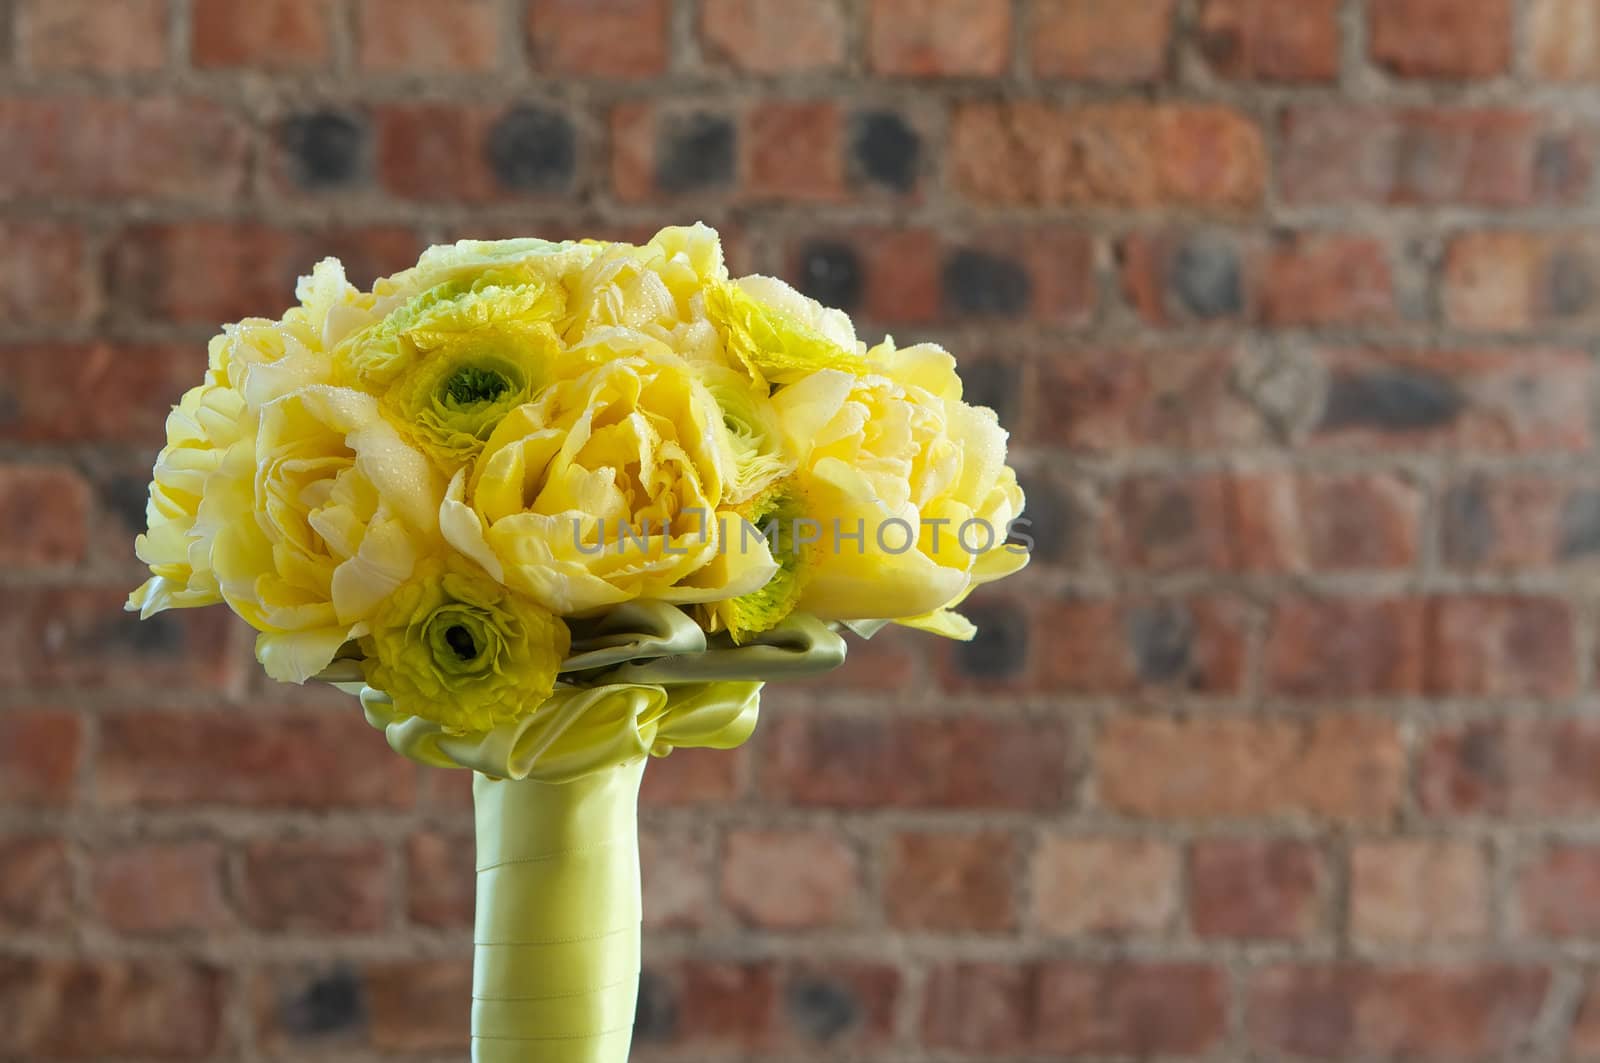 A colorful yellow bridal bouquet of flowers by Deimages